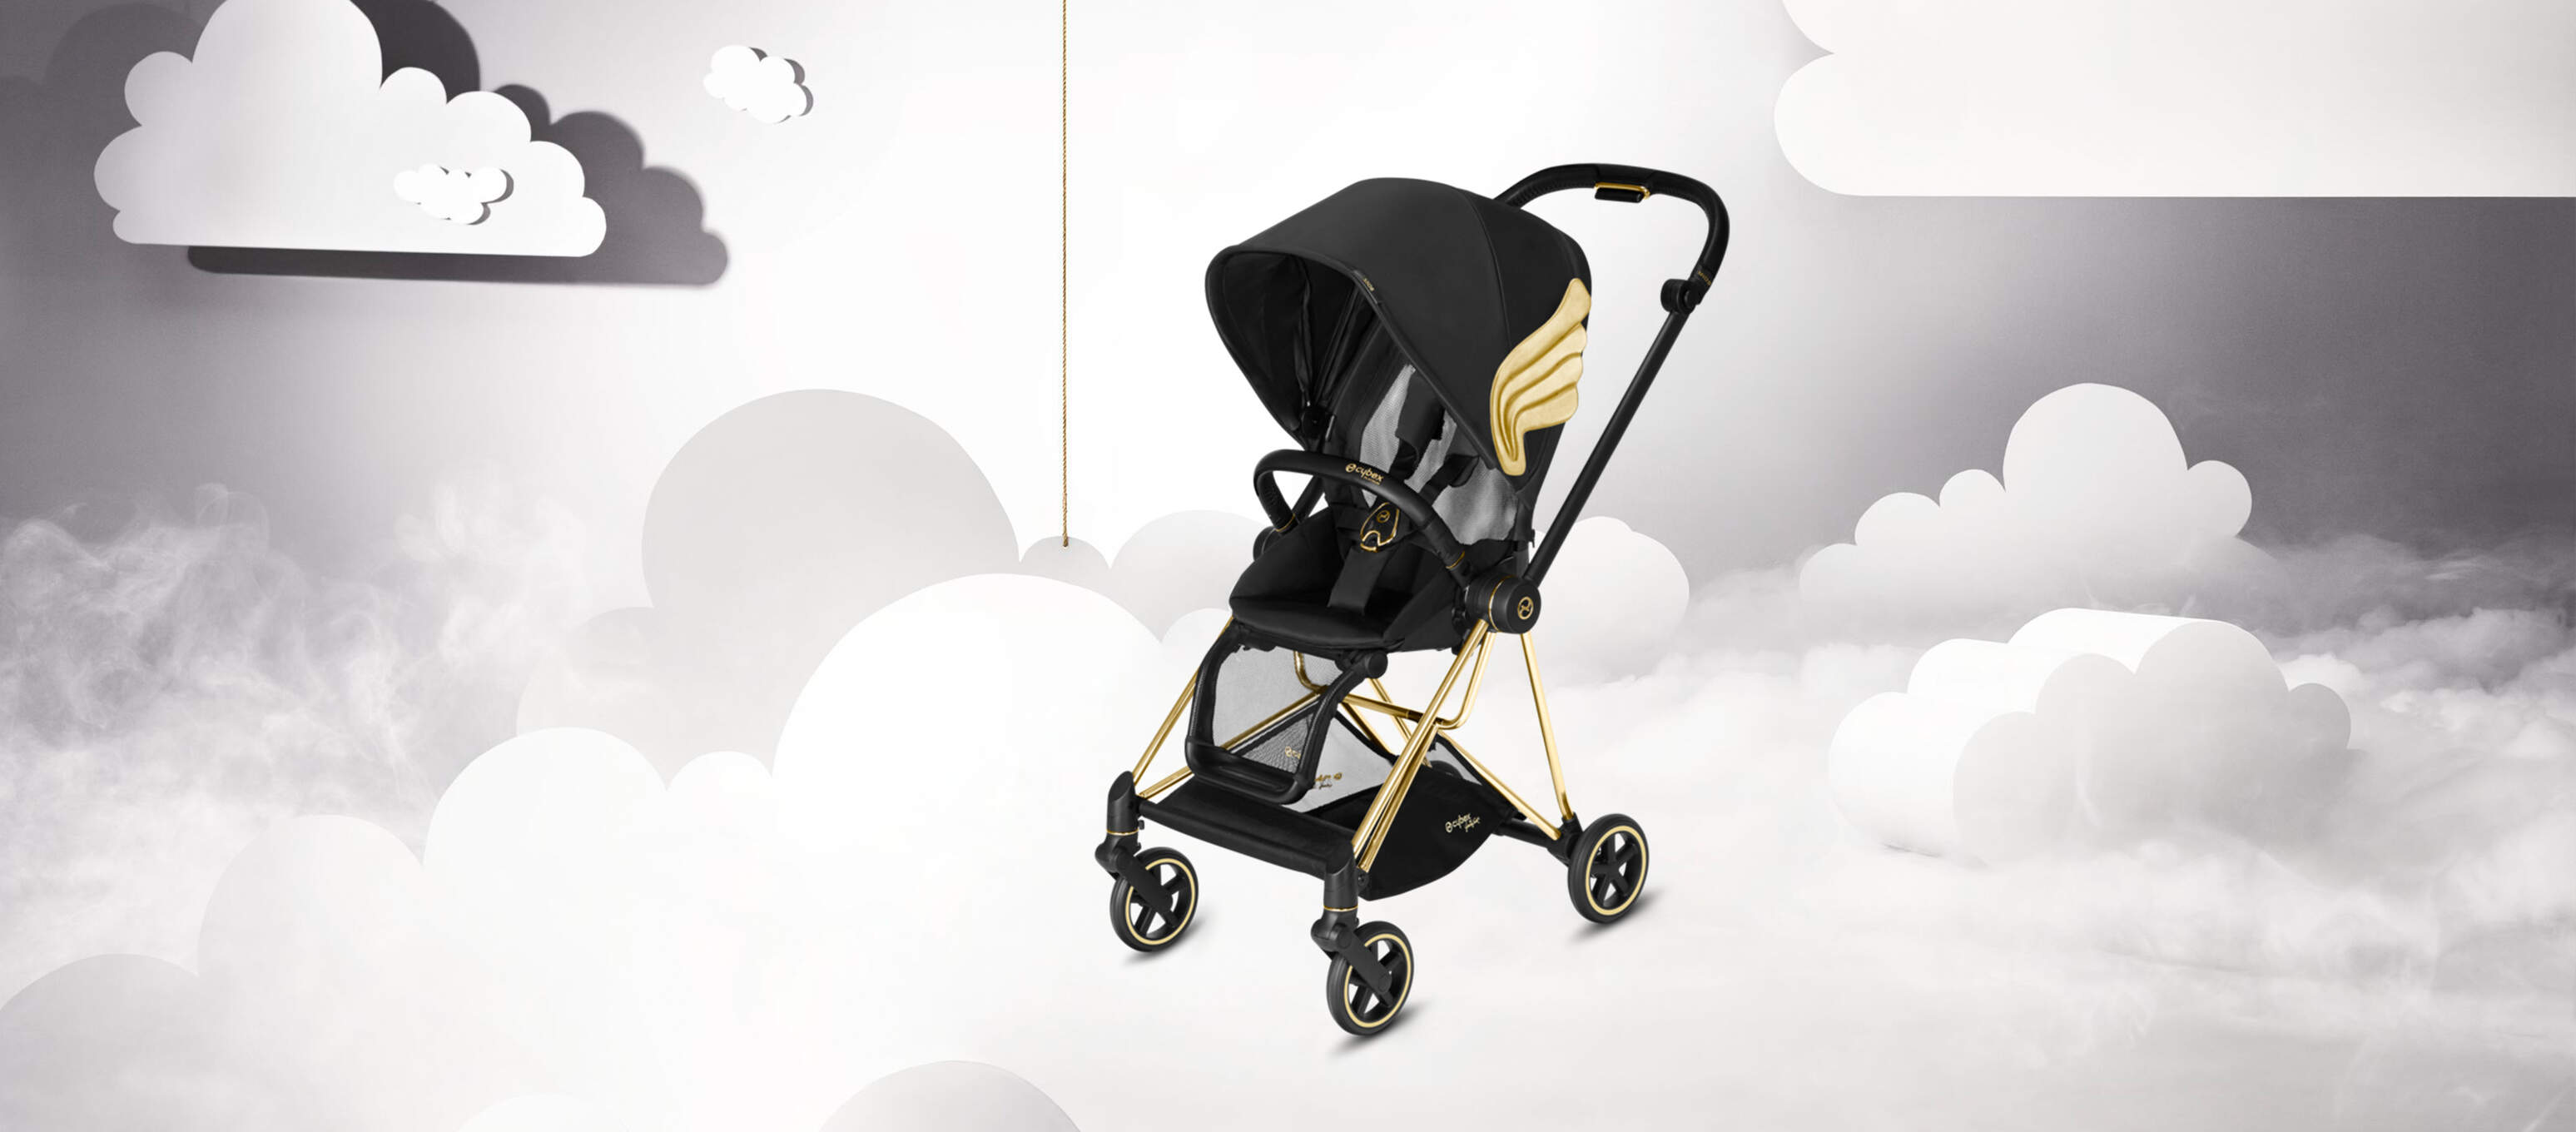 Cybex by Jeremy Scott Wings Collection Cloud and Stroller Image